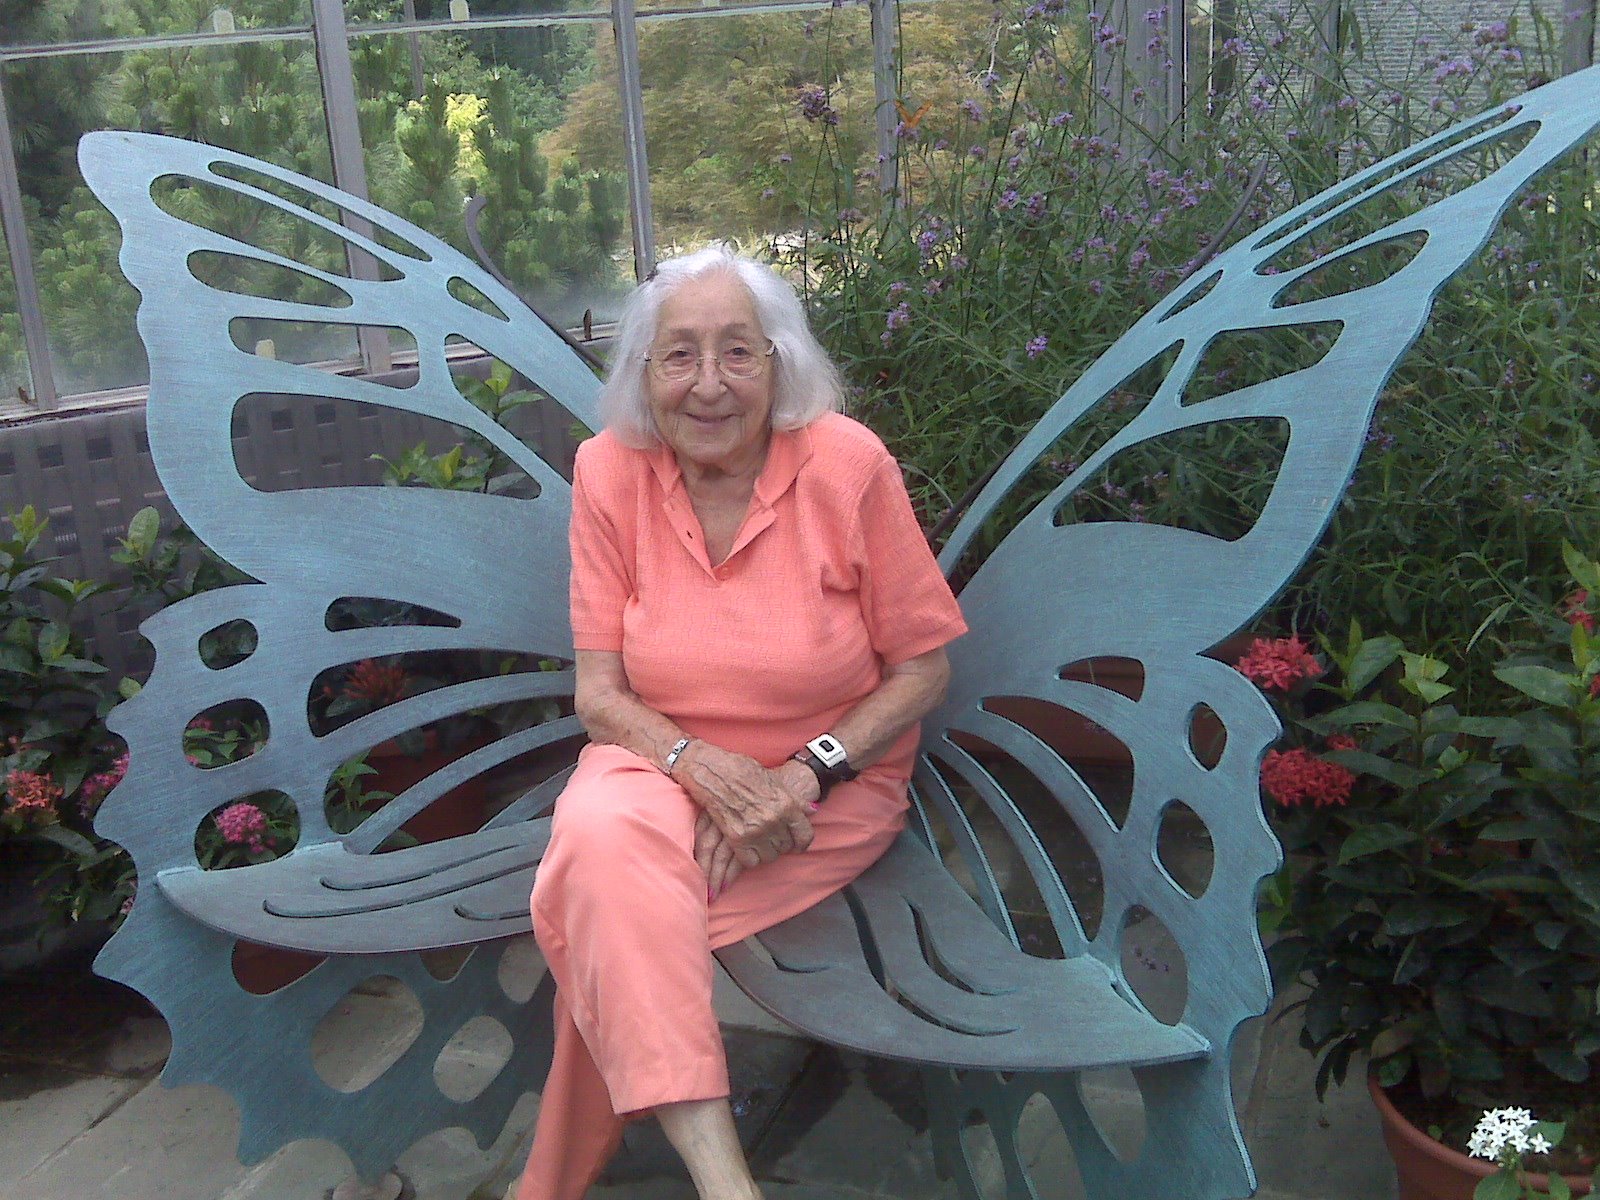 [mom+at+butterfly+exhibit.jpg]